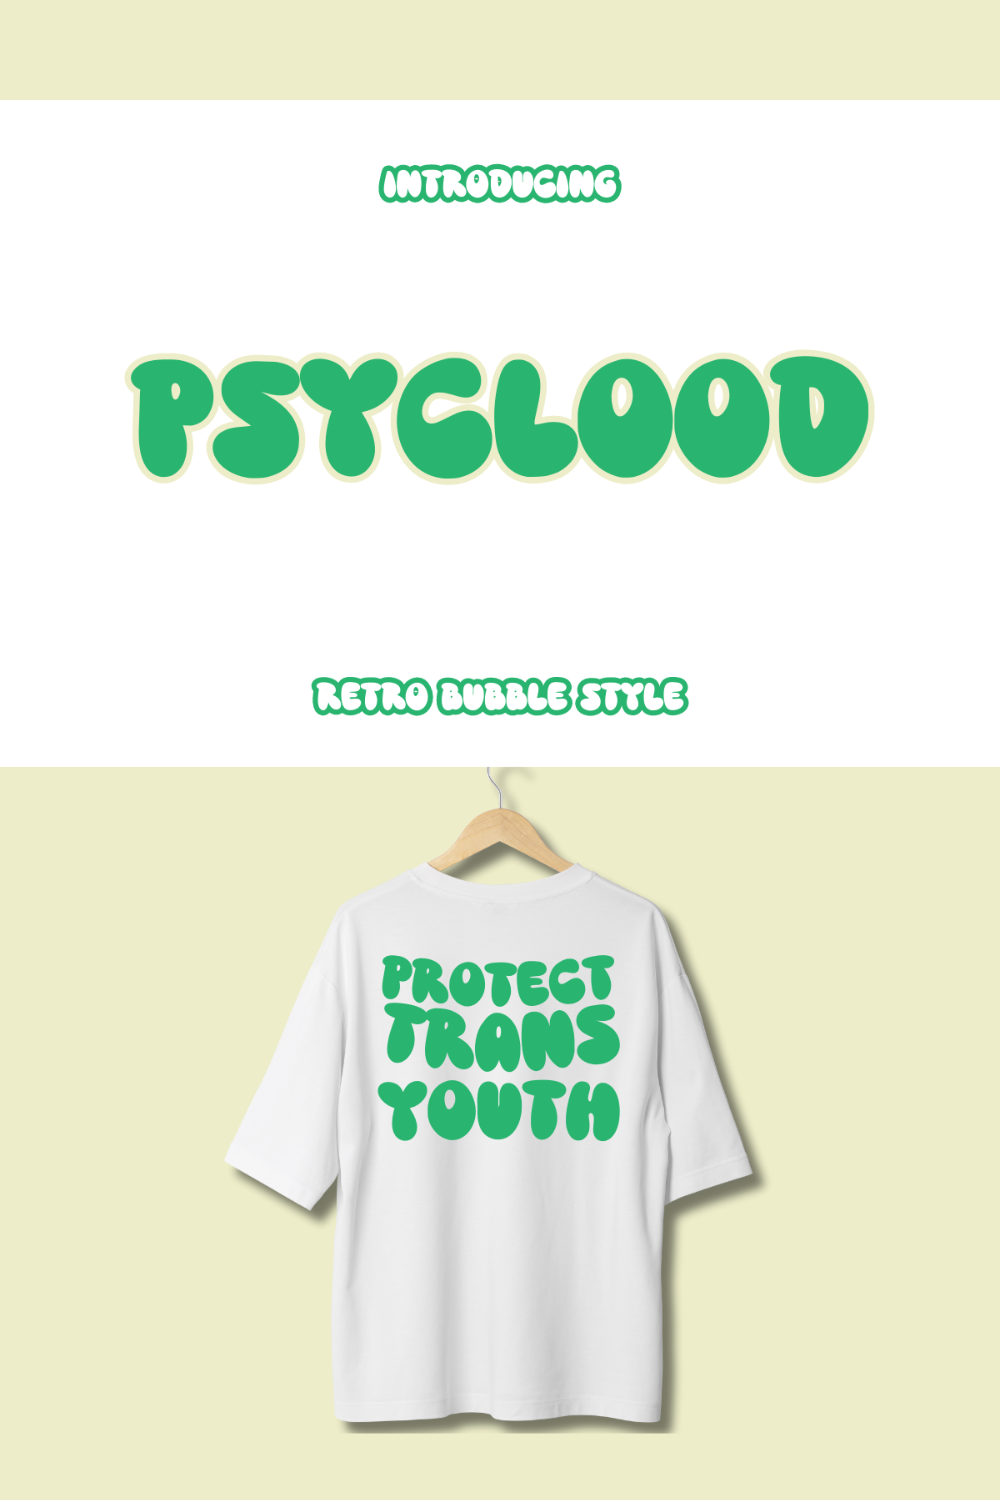 Psyclood pinterest preview image.